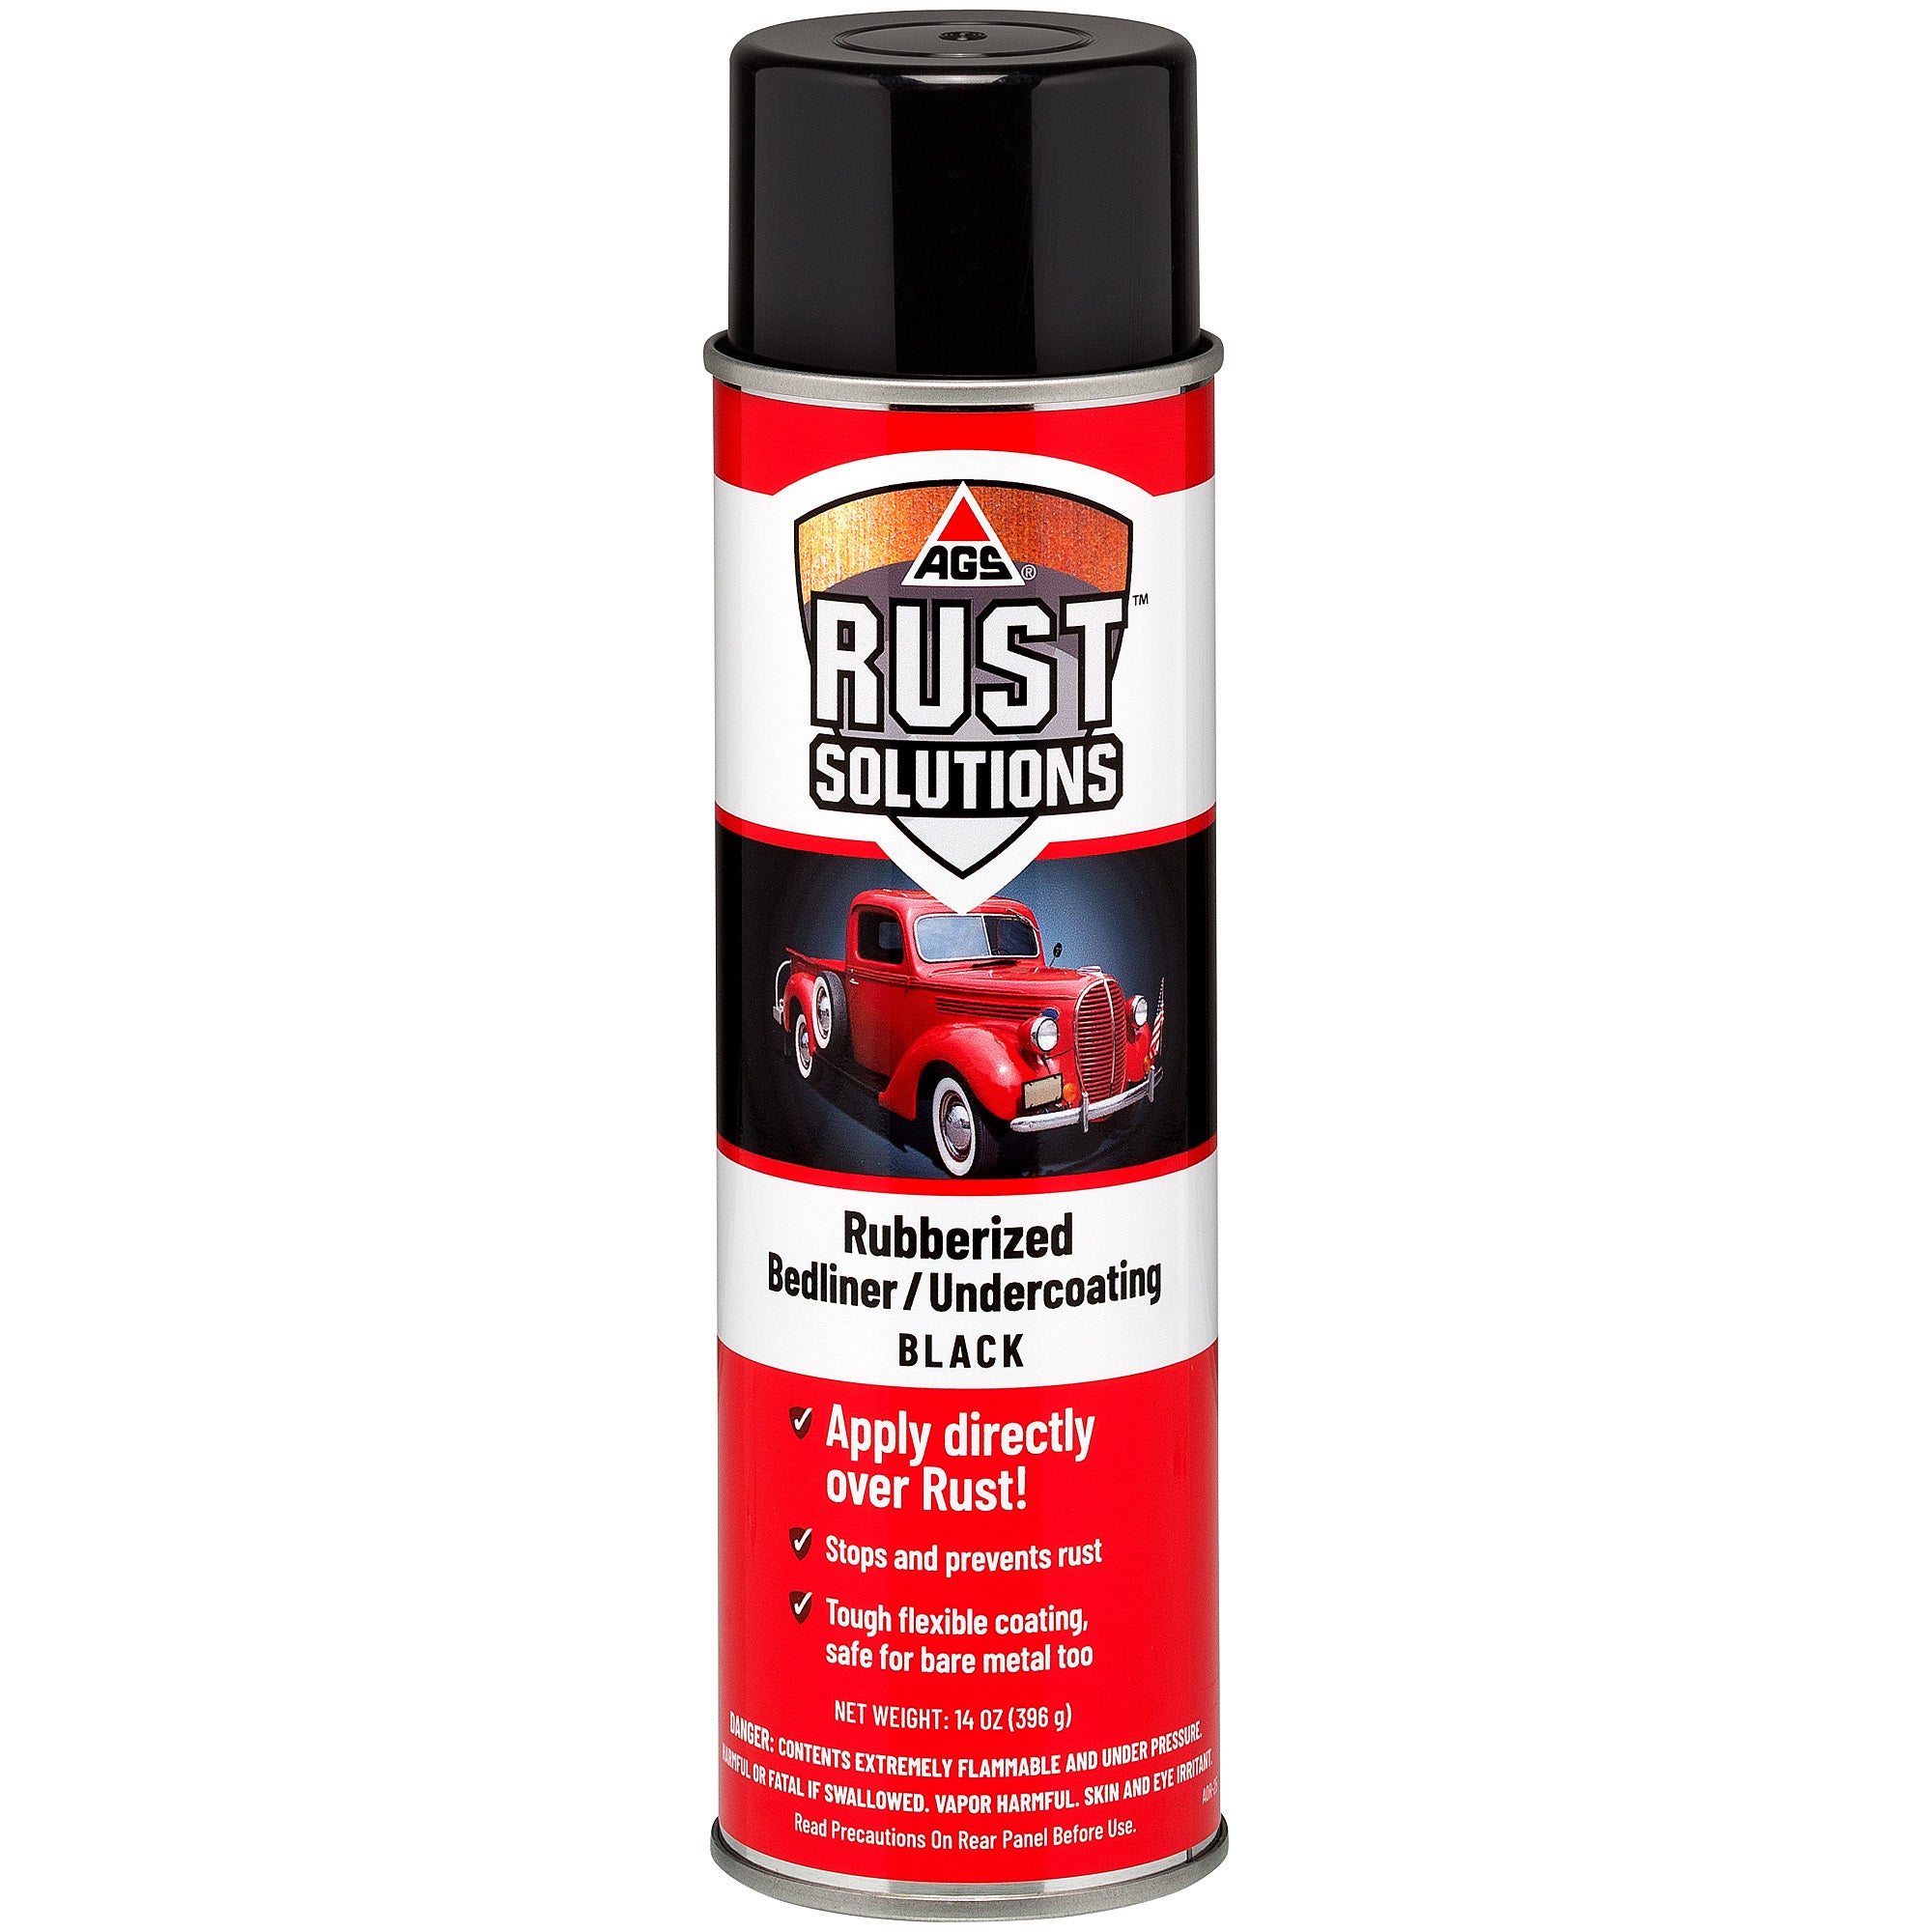 Rubberized Undercoating & Bedliner Aerosol - AGS Rust Solutions